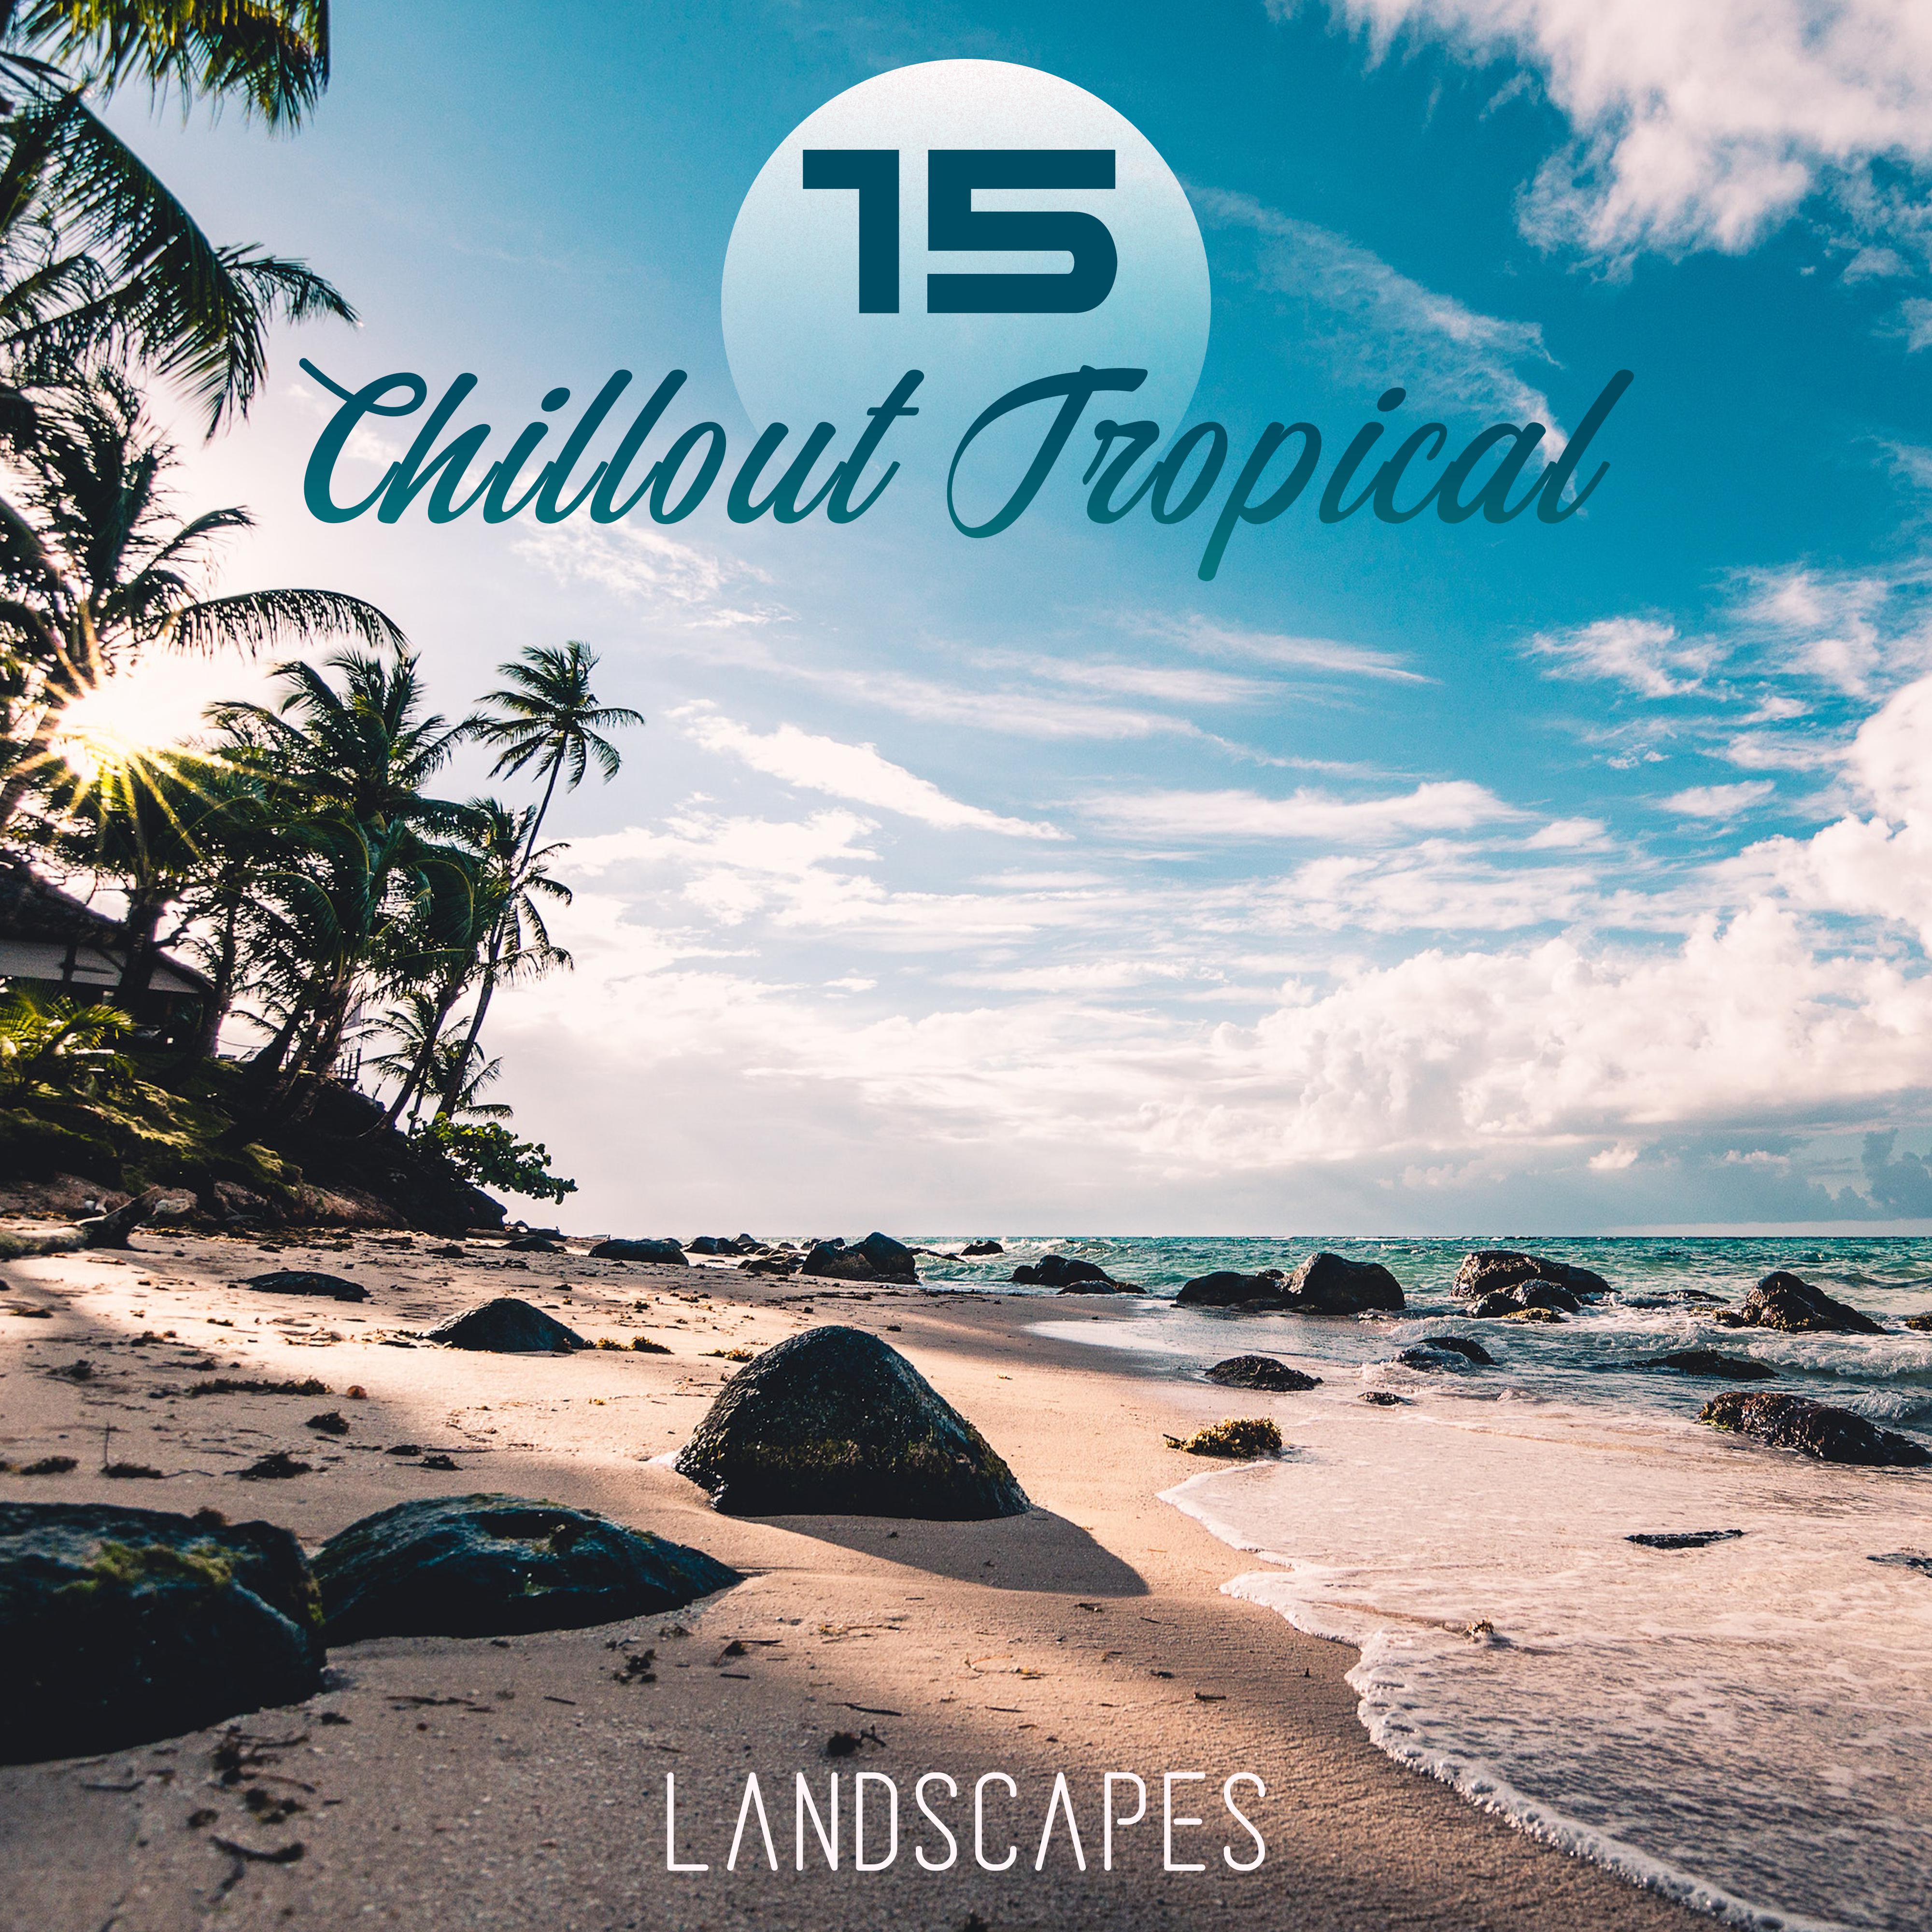 15 Chillout Tropical Landscapes: 2019 Chill Out Delicate & Soothing Music, Soft Beats & Ambient Melodies, Full Calming Down & Rest Tracks, Sounds of Total Relaxation on the Beach